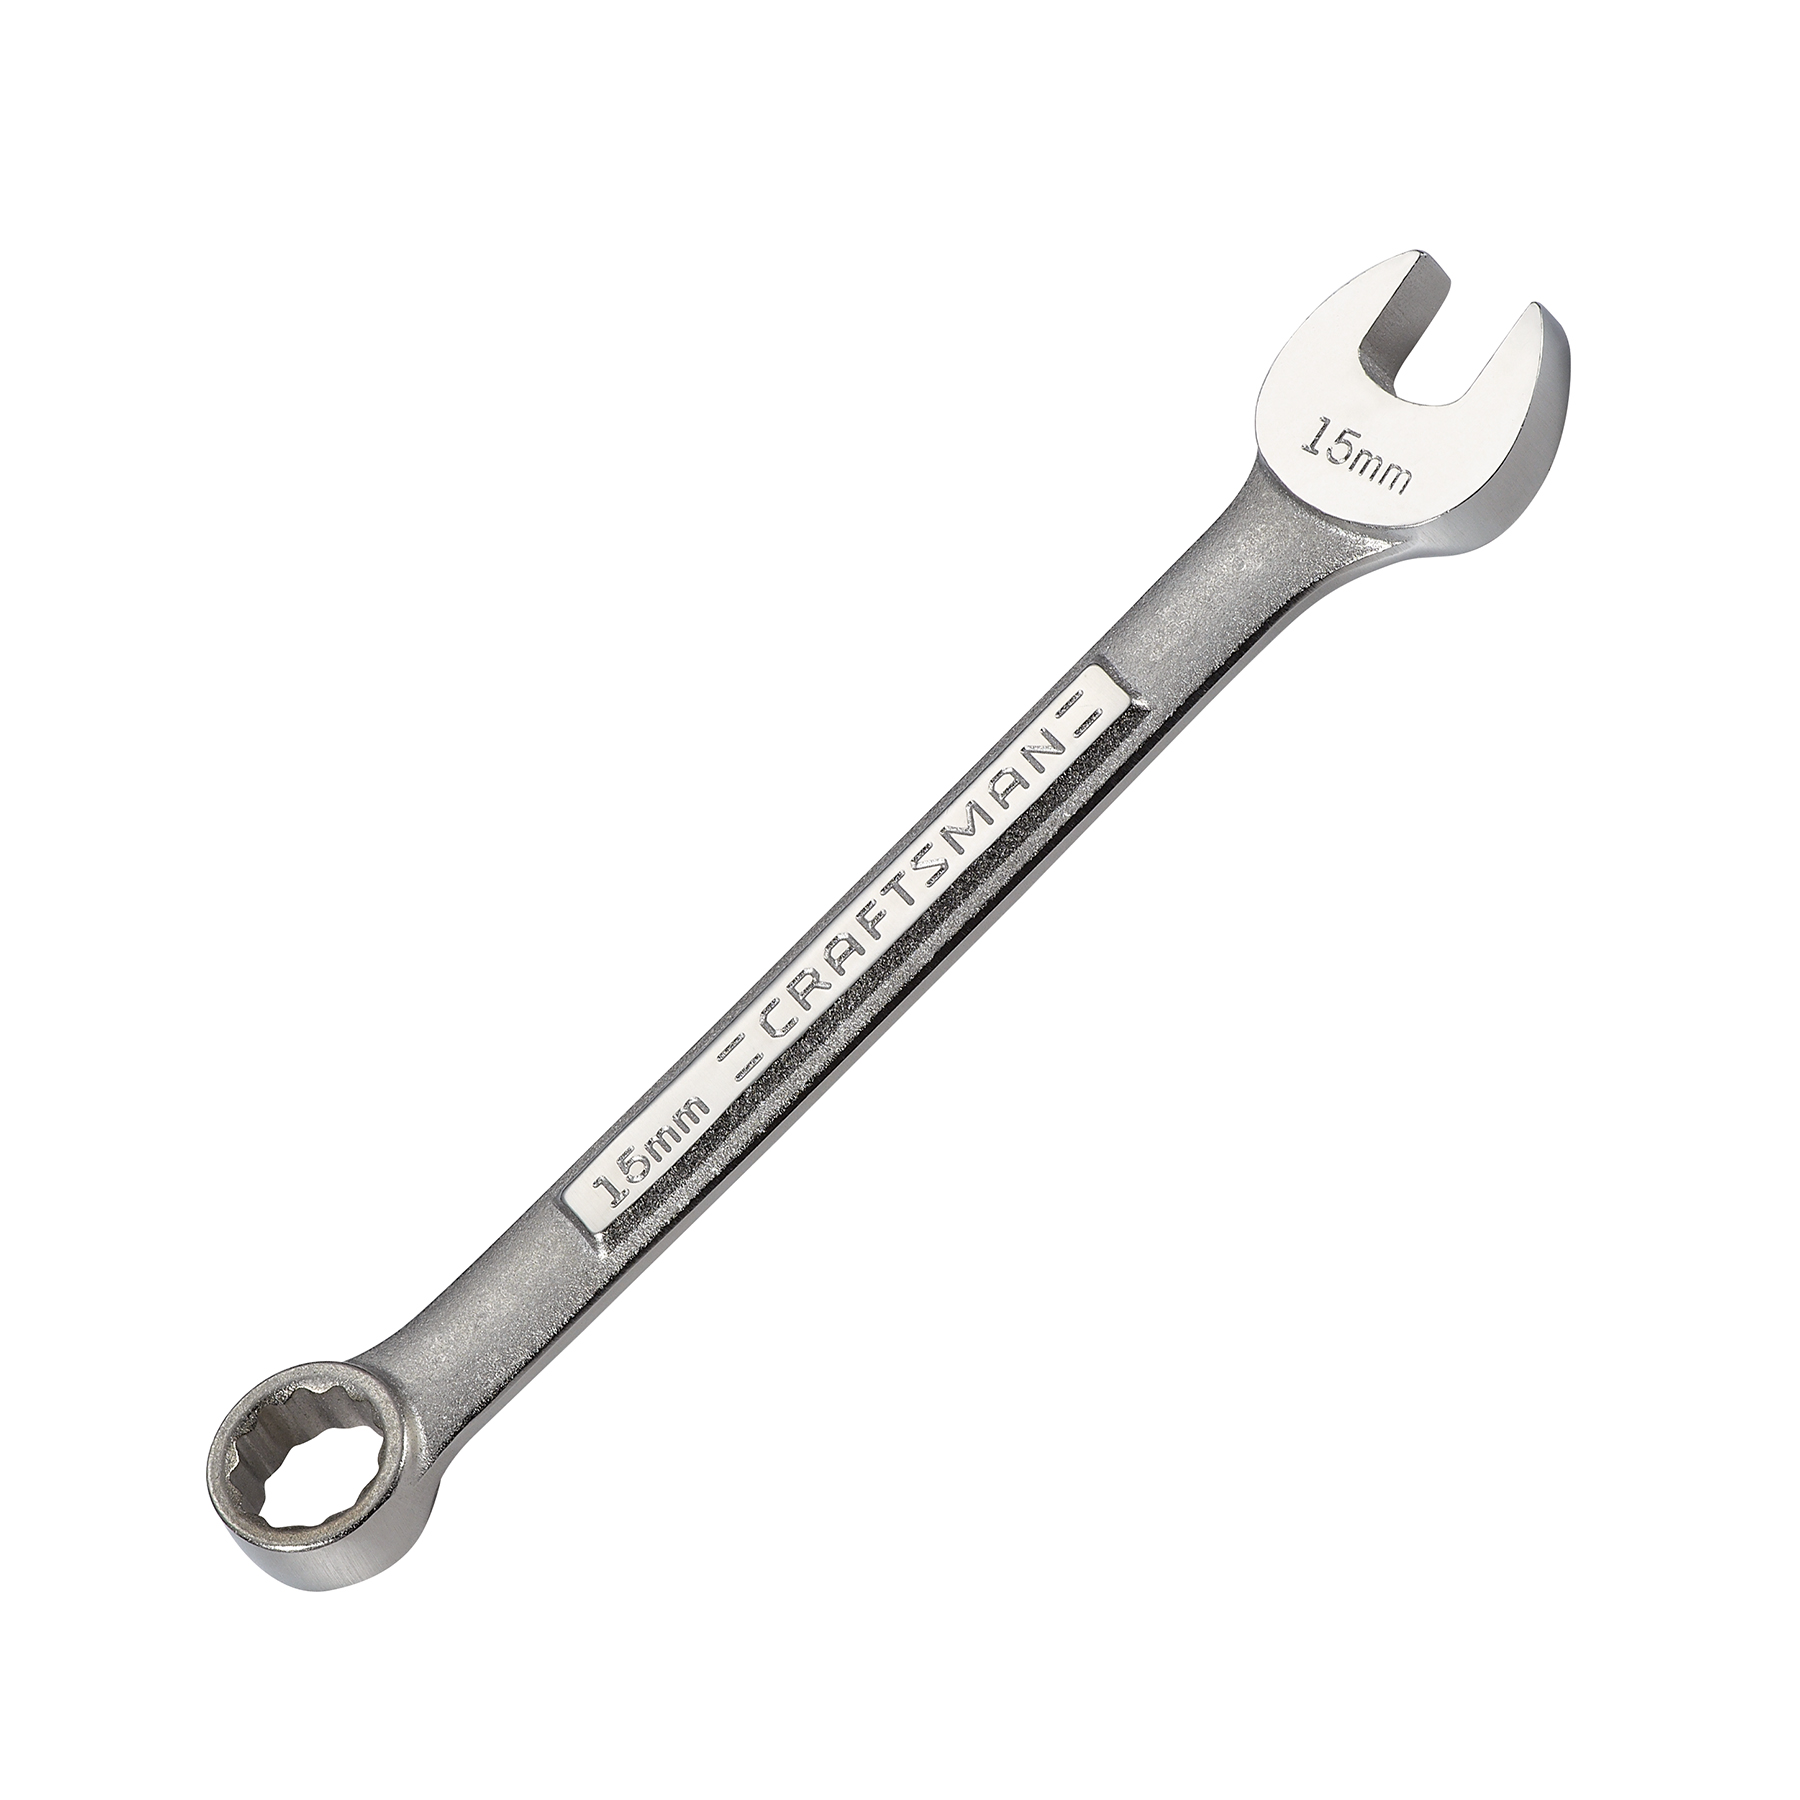 Craftsman 15mm 12 pt. Combination Wrench